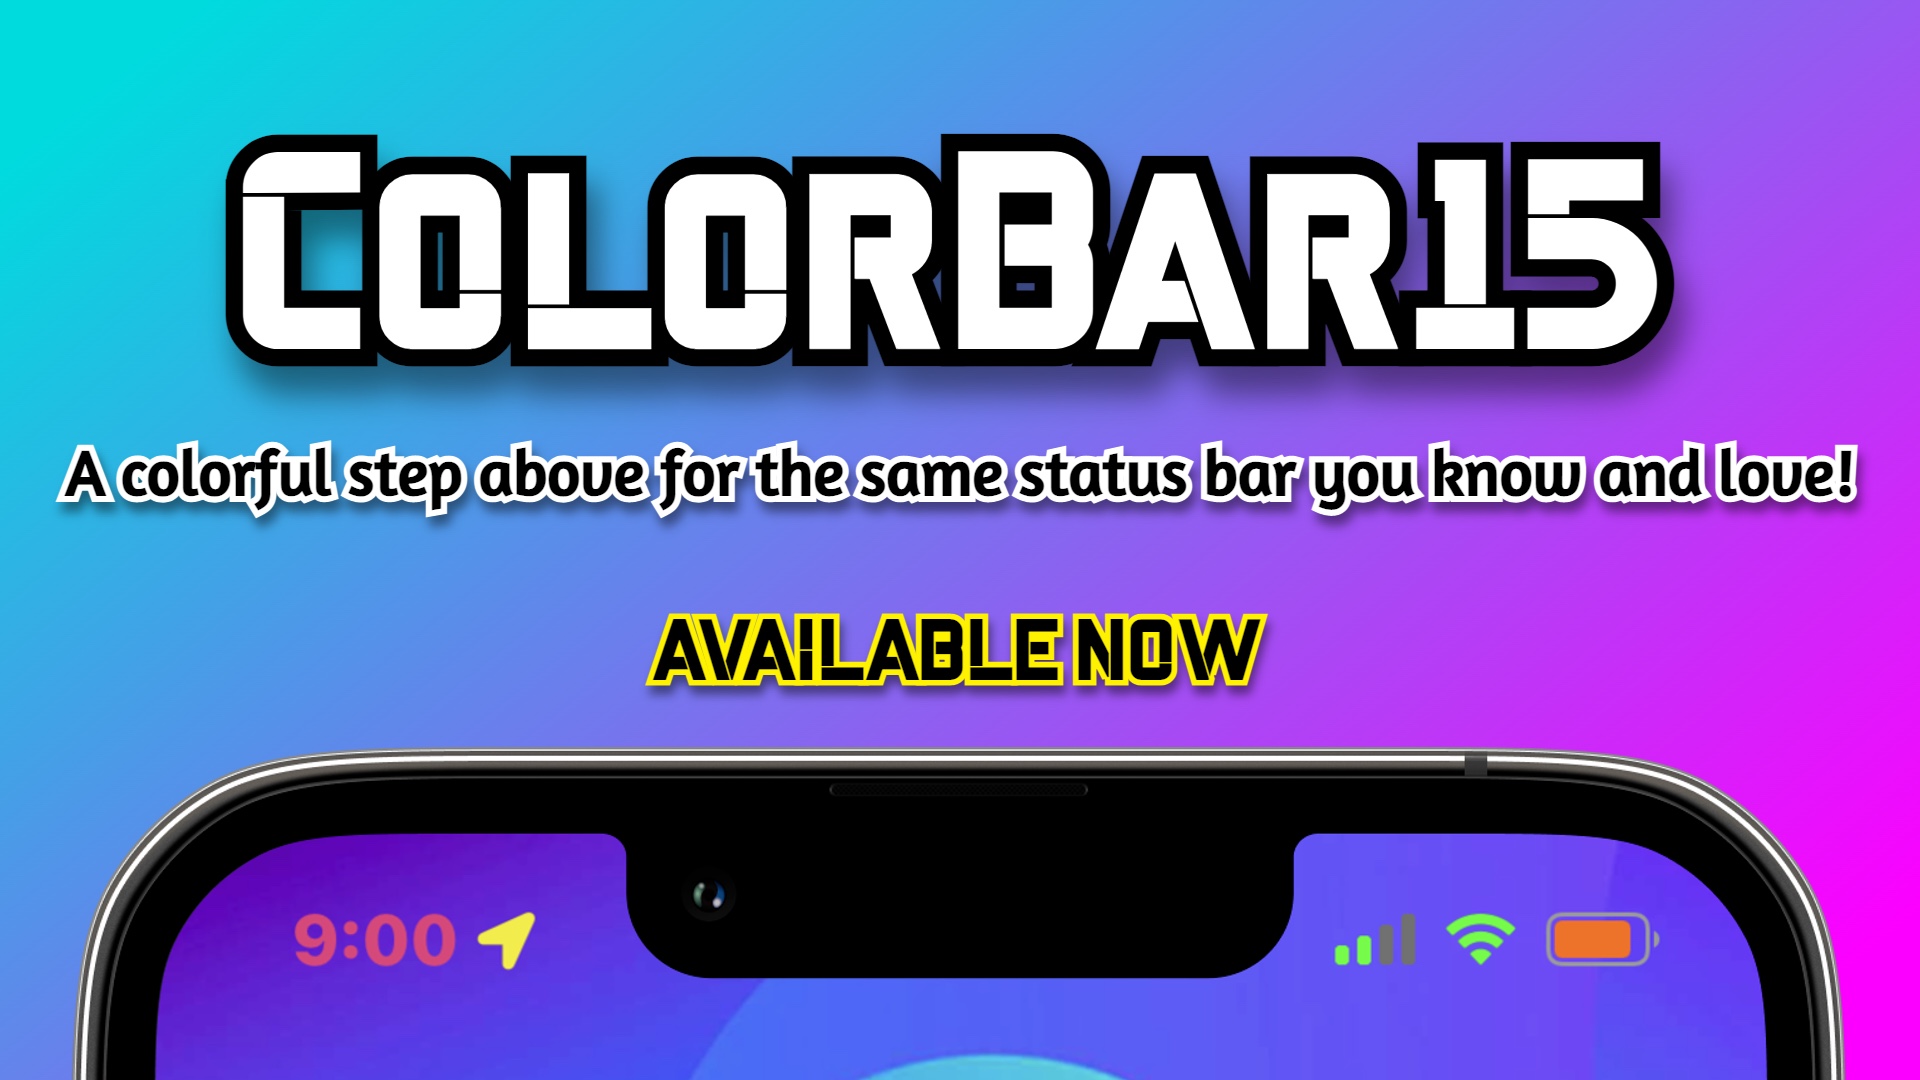 Colorize your jailbroken iOS 15 device’s Status Bar with ColorBar15.